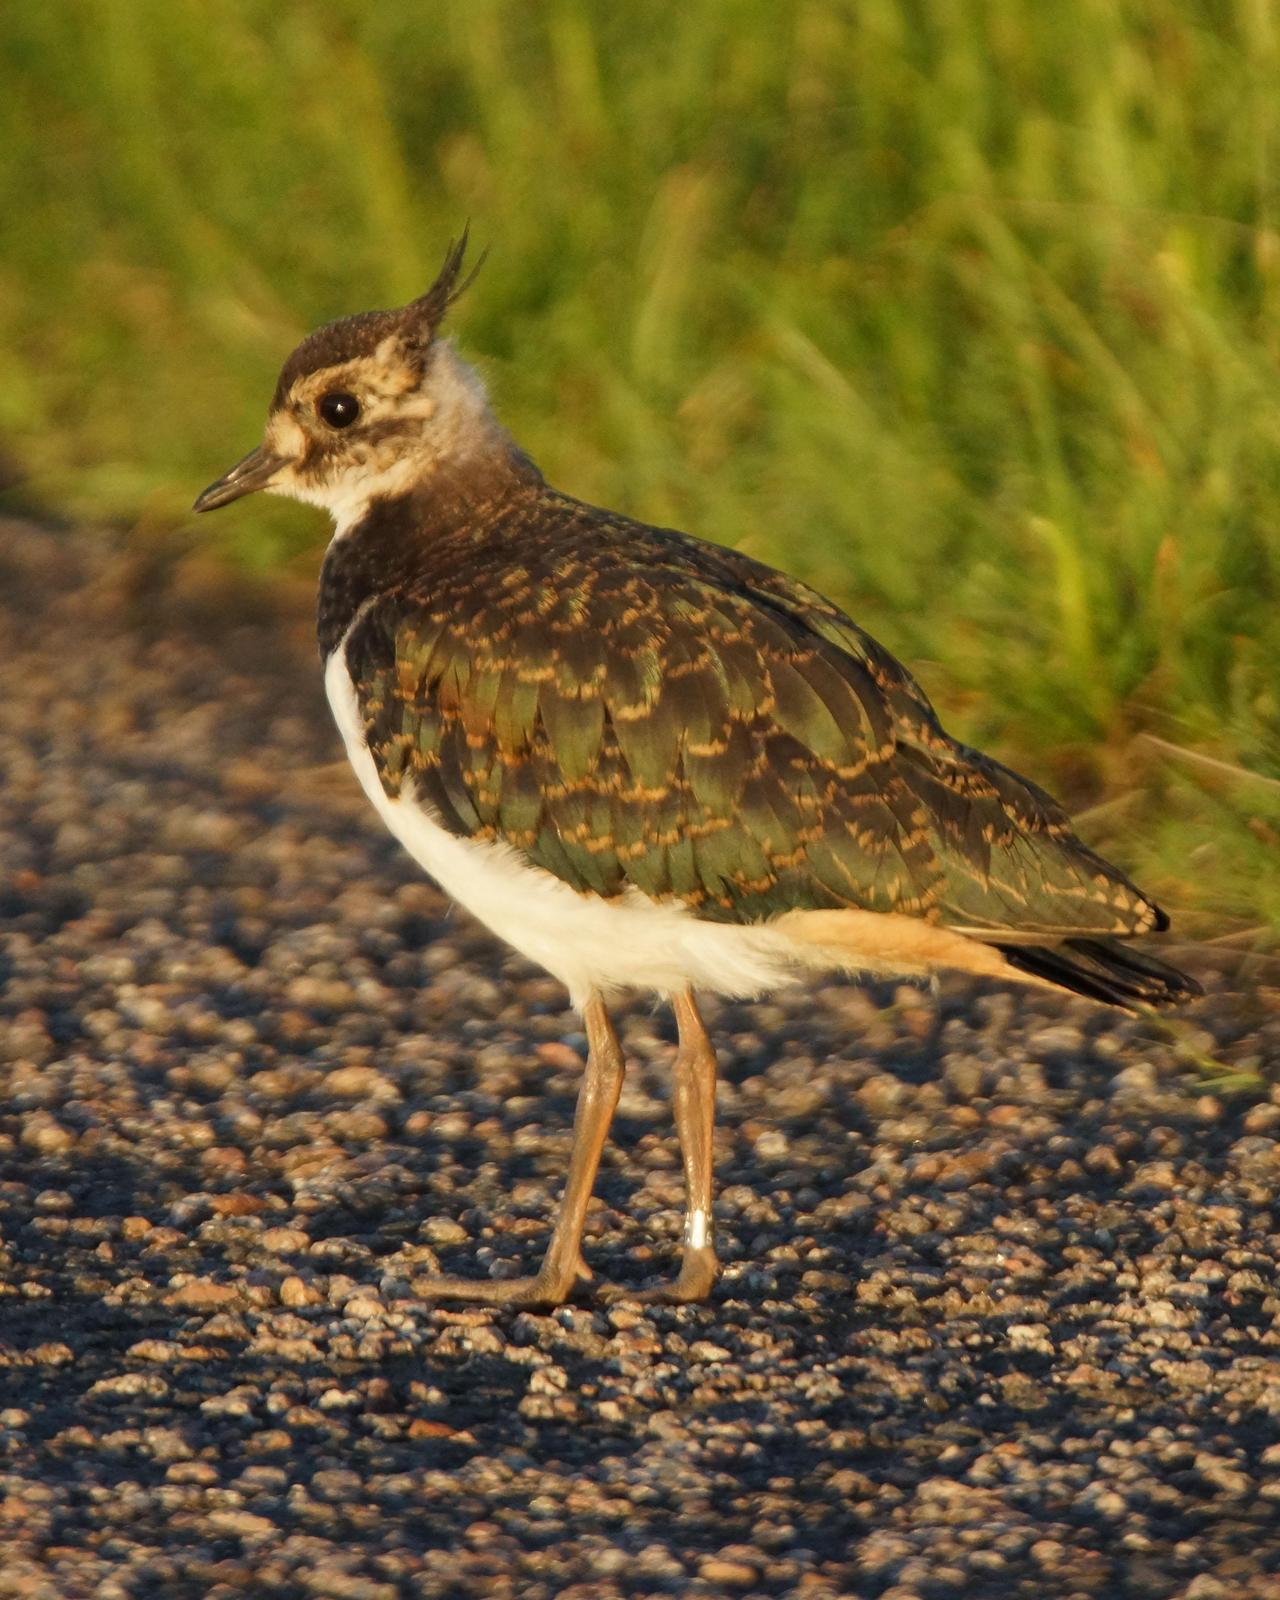 Northern Lapwing Photo by Steve Percival